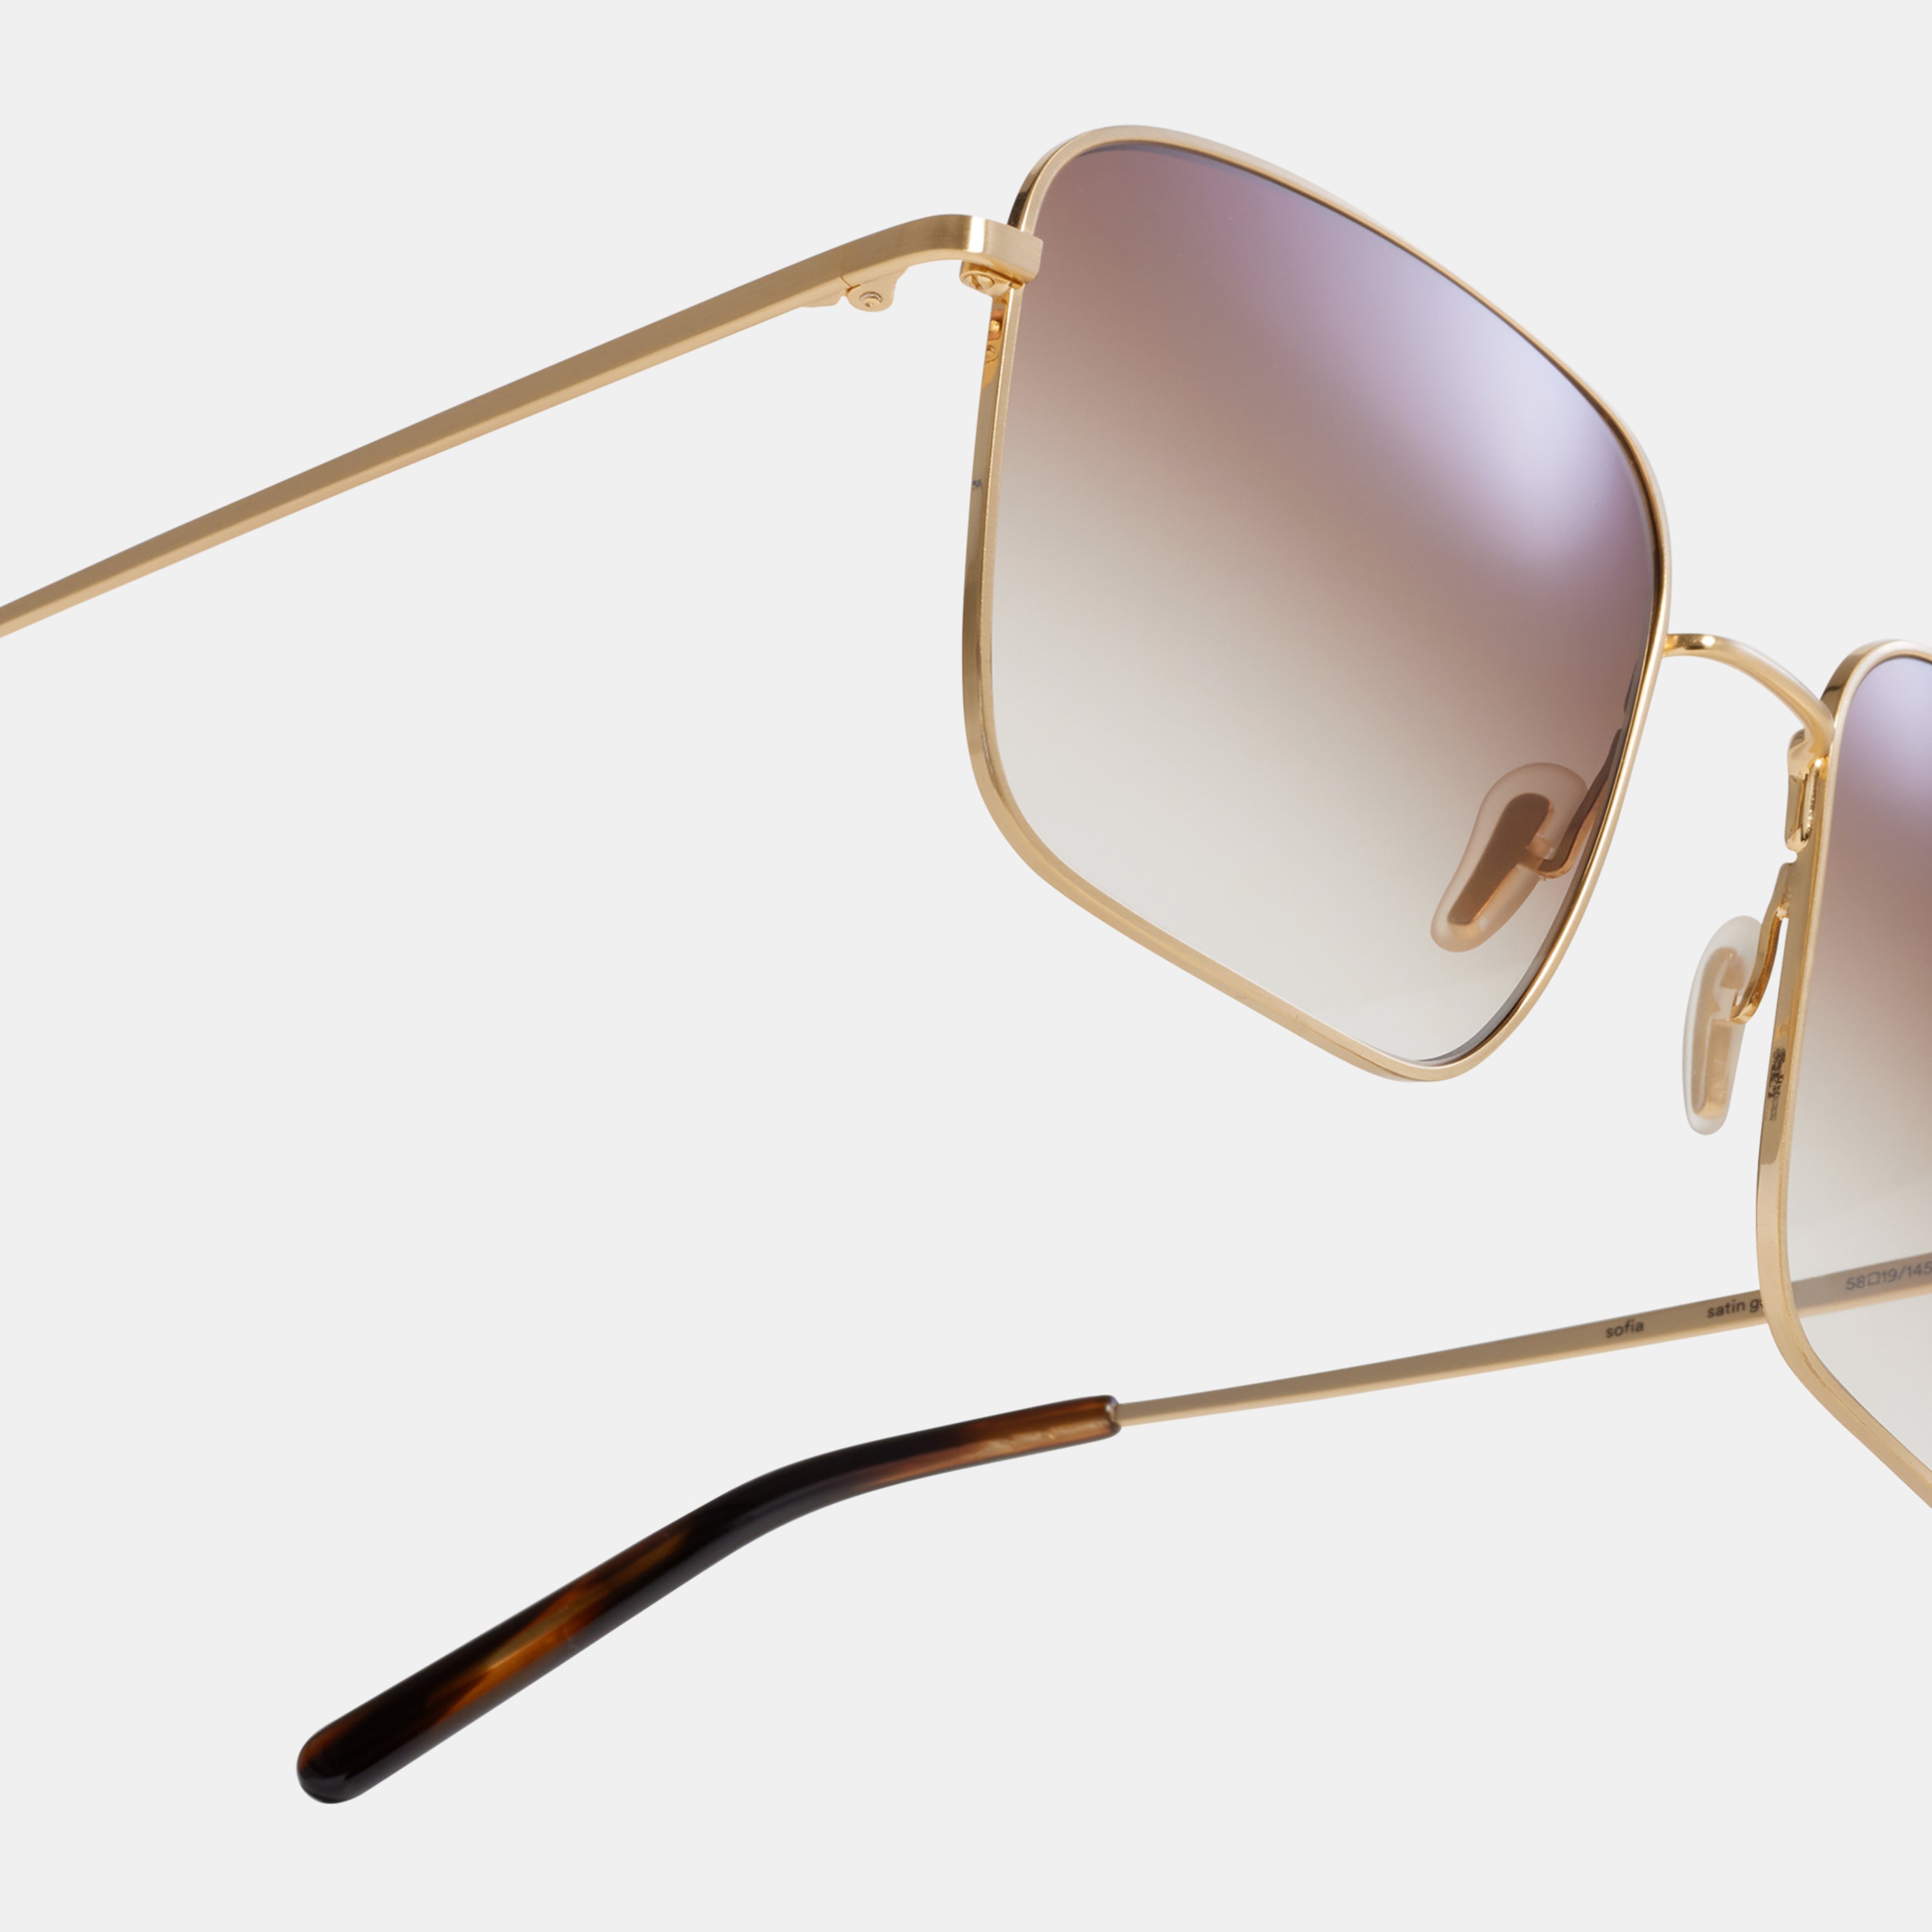 Ace & Tate Sunglasses | Square Metal in Gold